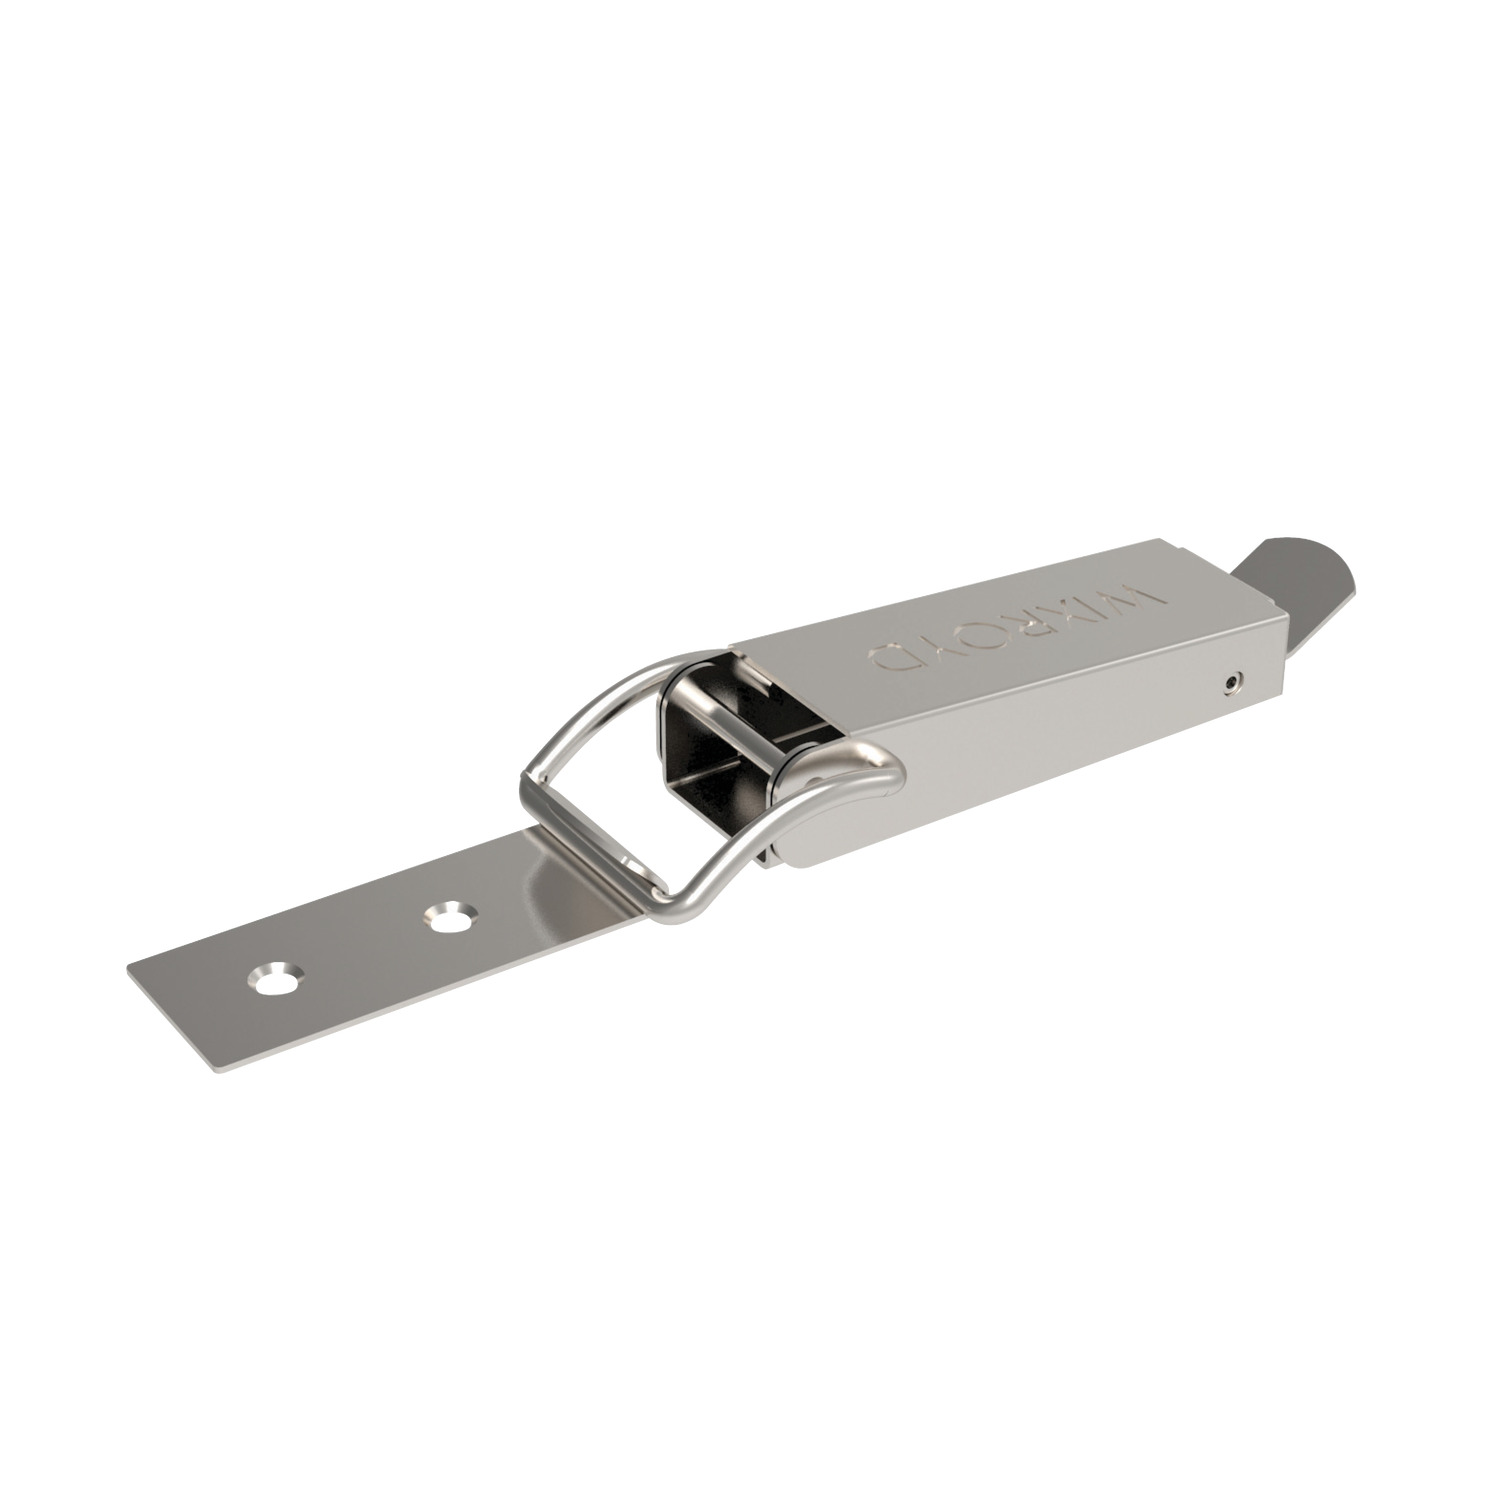 J0426.AC0030 Toggle Latches Stainless Steel - 193,5 - 19 - 43